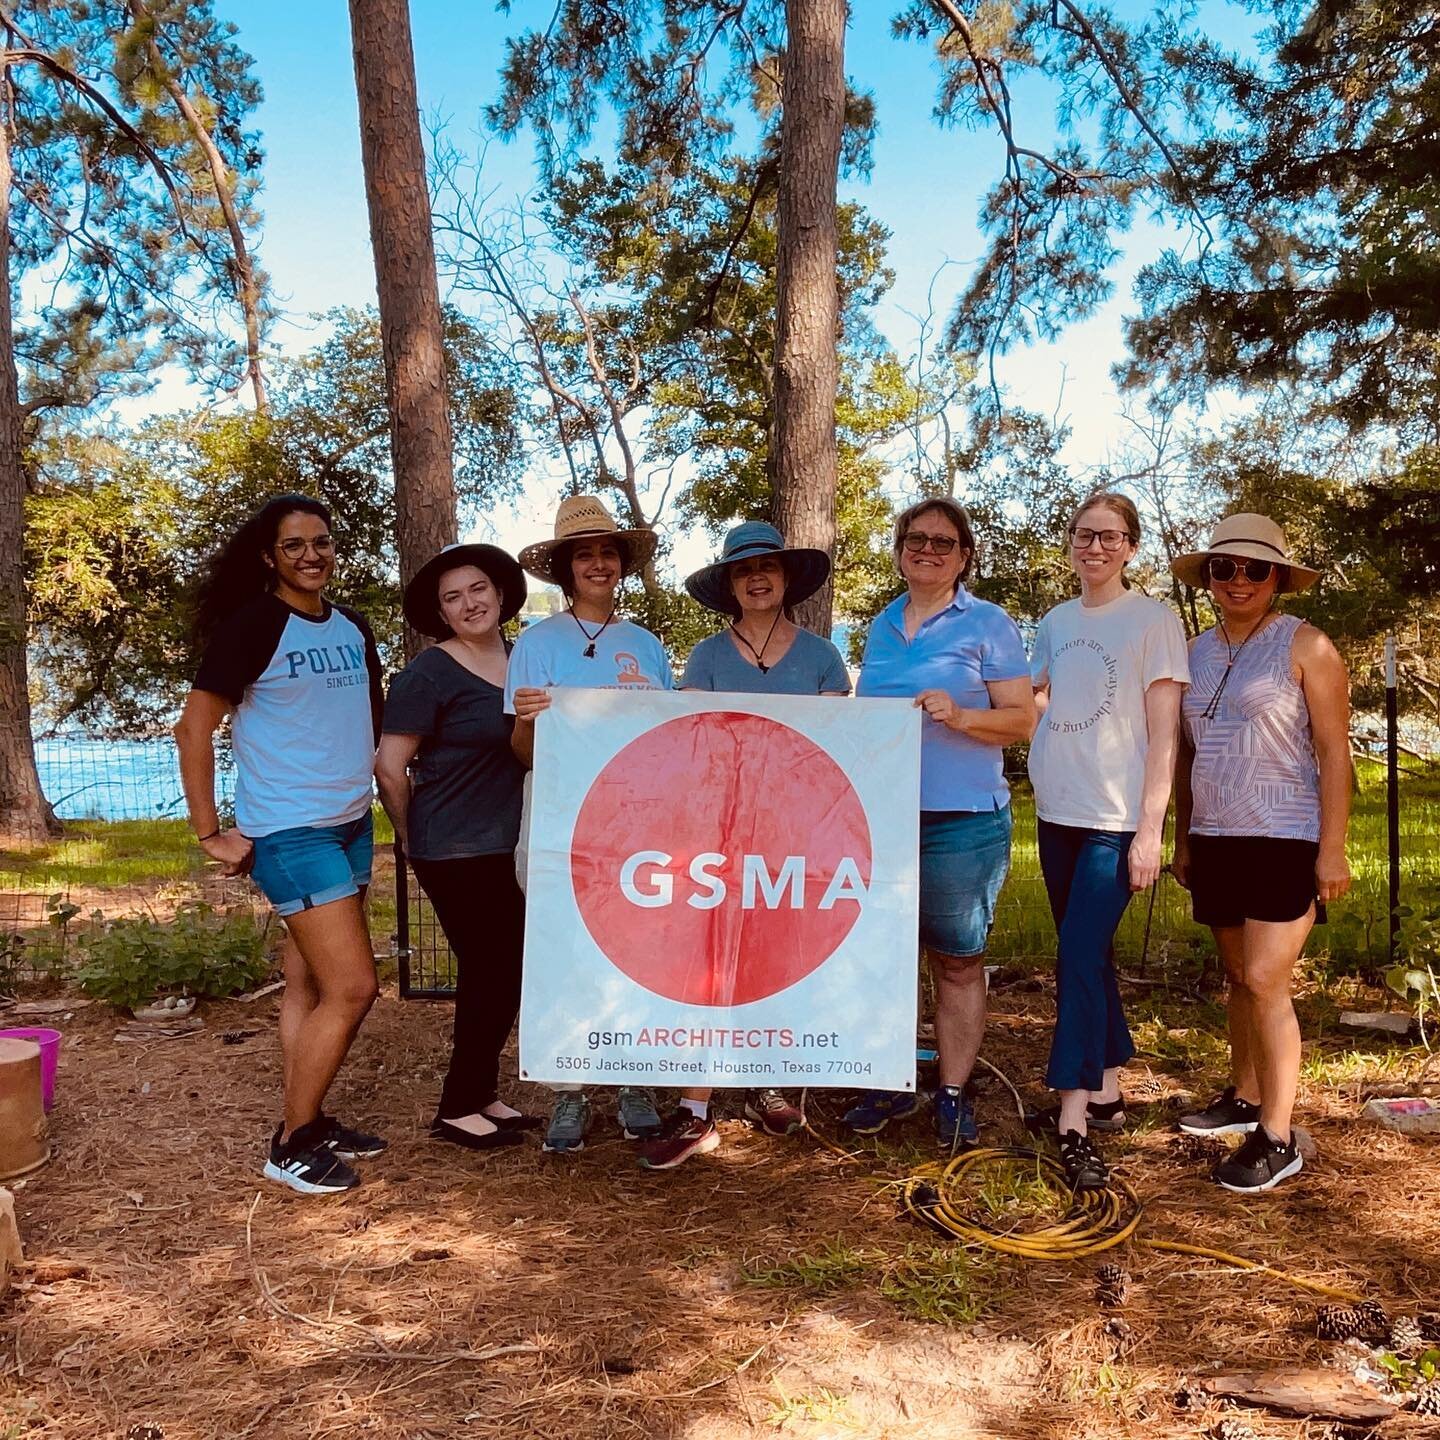 Over the holiday weekend GSMA went to the lake to recharge. We believe creativity is not limited to the office. From macrame to color studies, we find ways to design wherever we are.  #teambuildingactivities  #worklifebalancegoals  #roadtripwithcolle